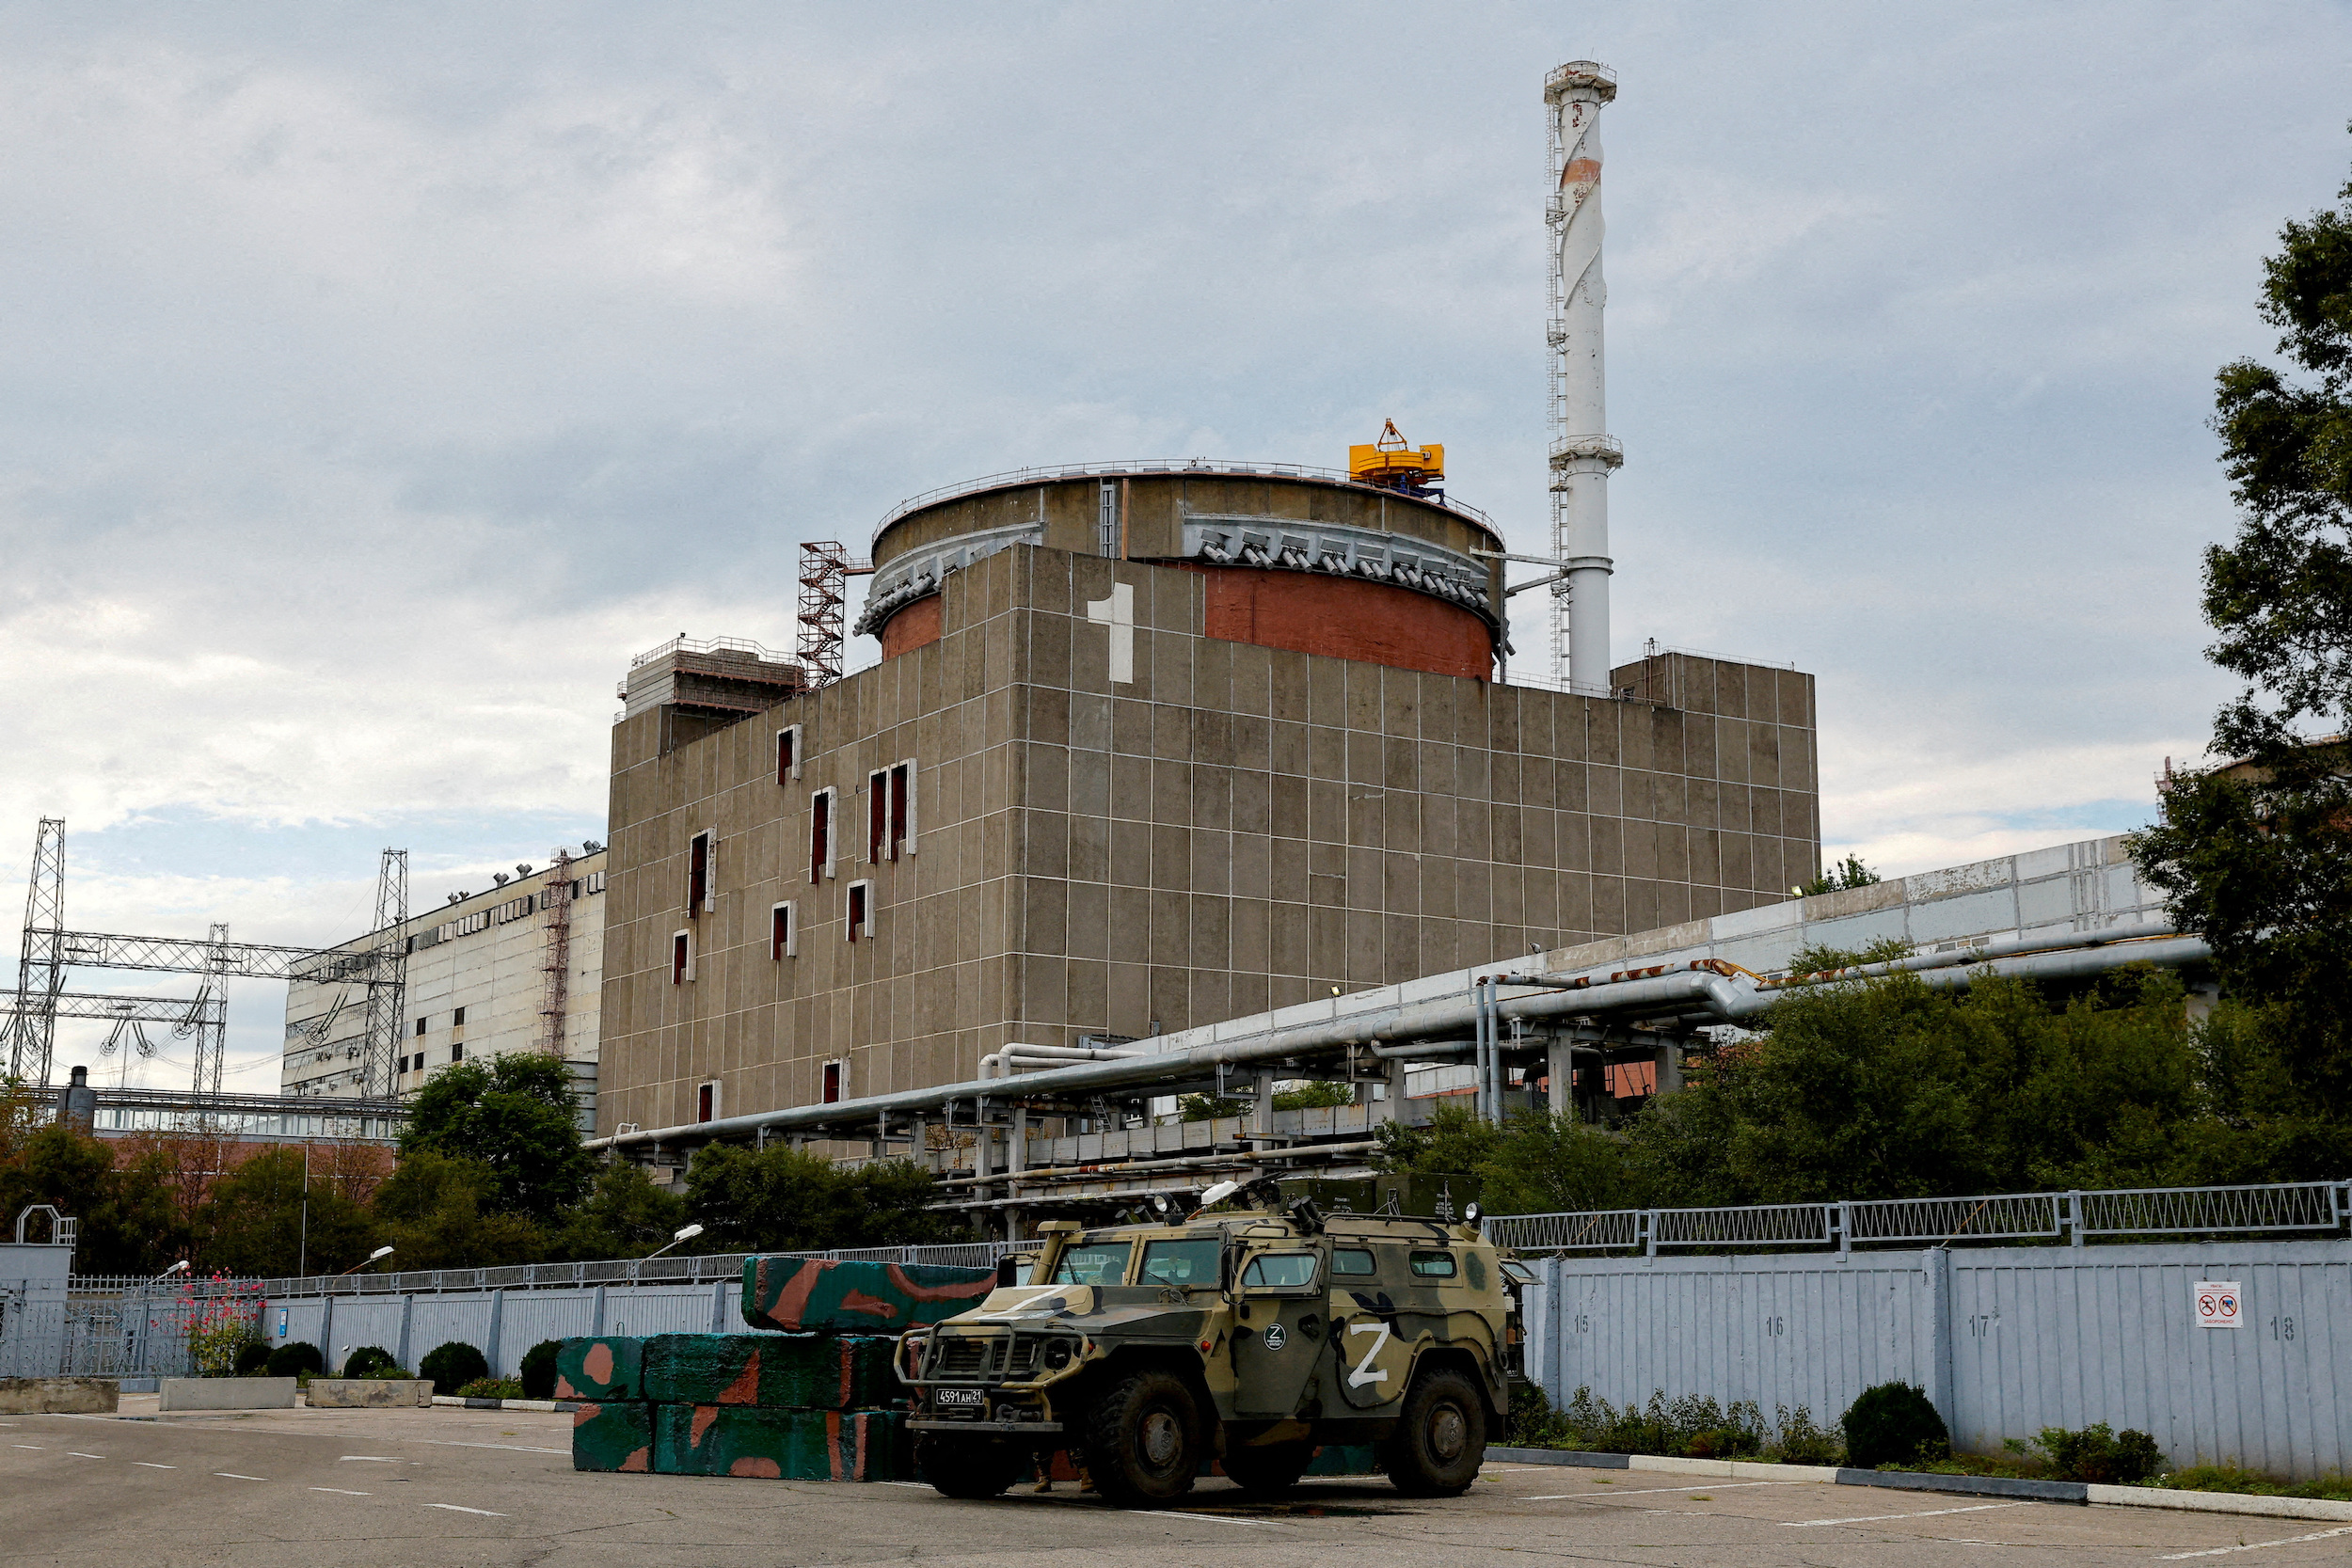 A Russian armored vehicle is seen parked outside the Zaporizhzhia nuclear power plant in September.